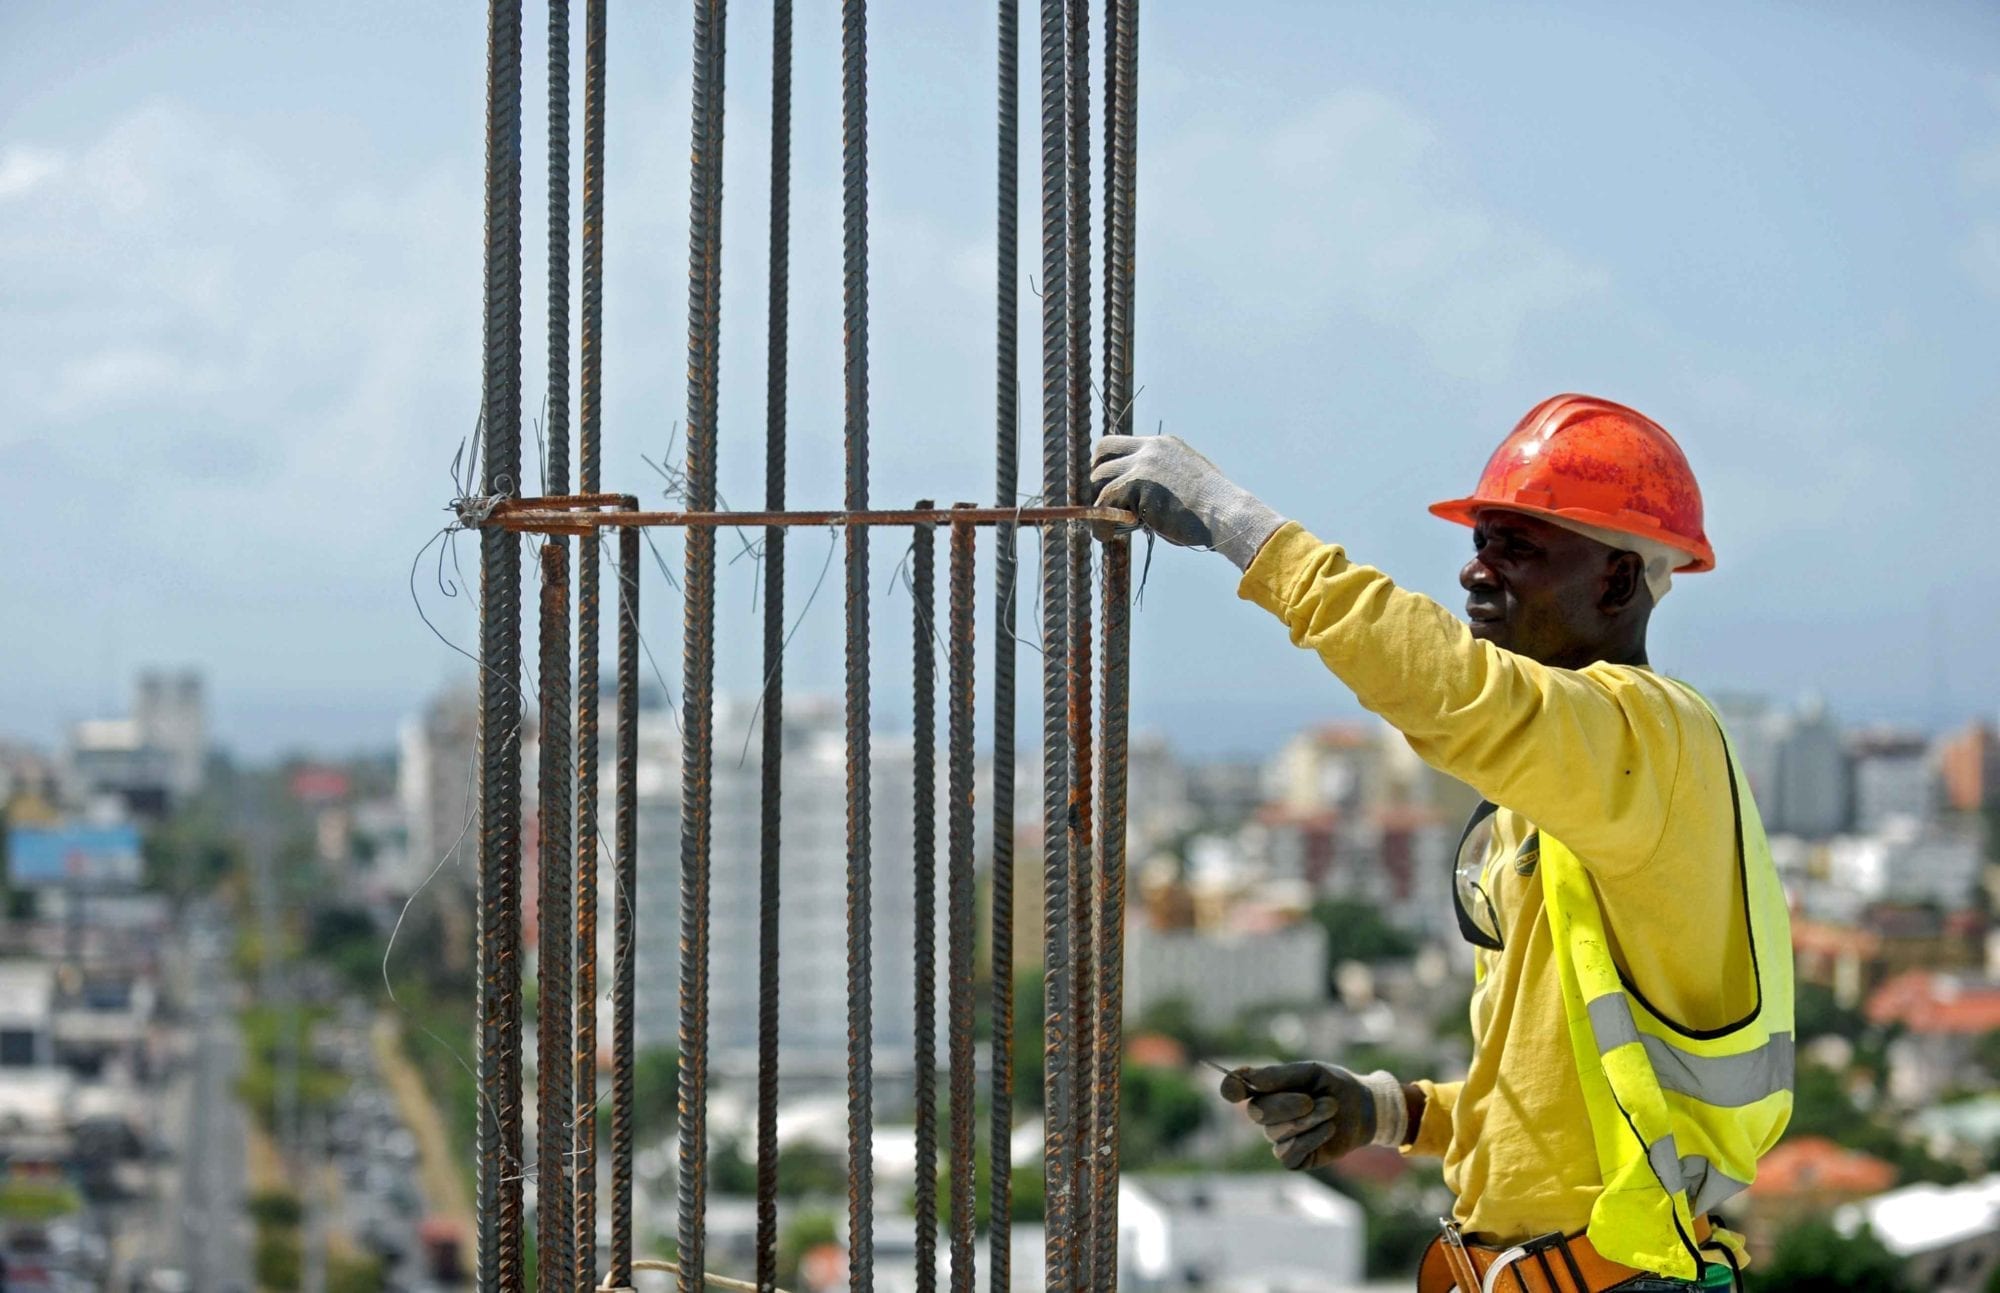 Migrant worker in the Dominican Republic working in construction